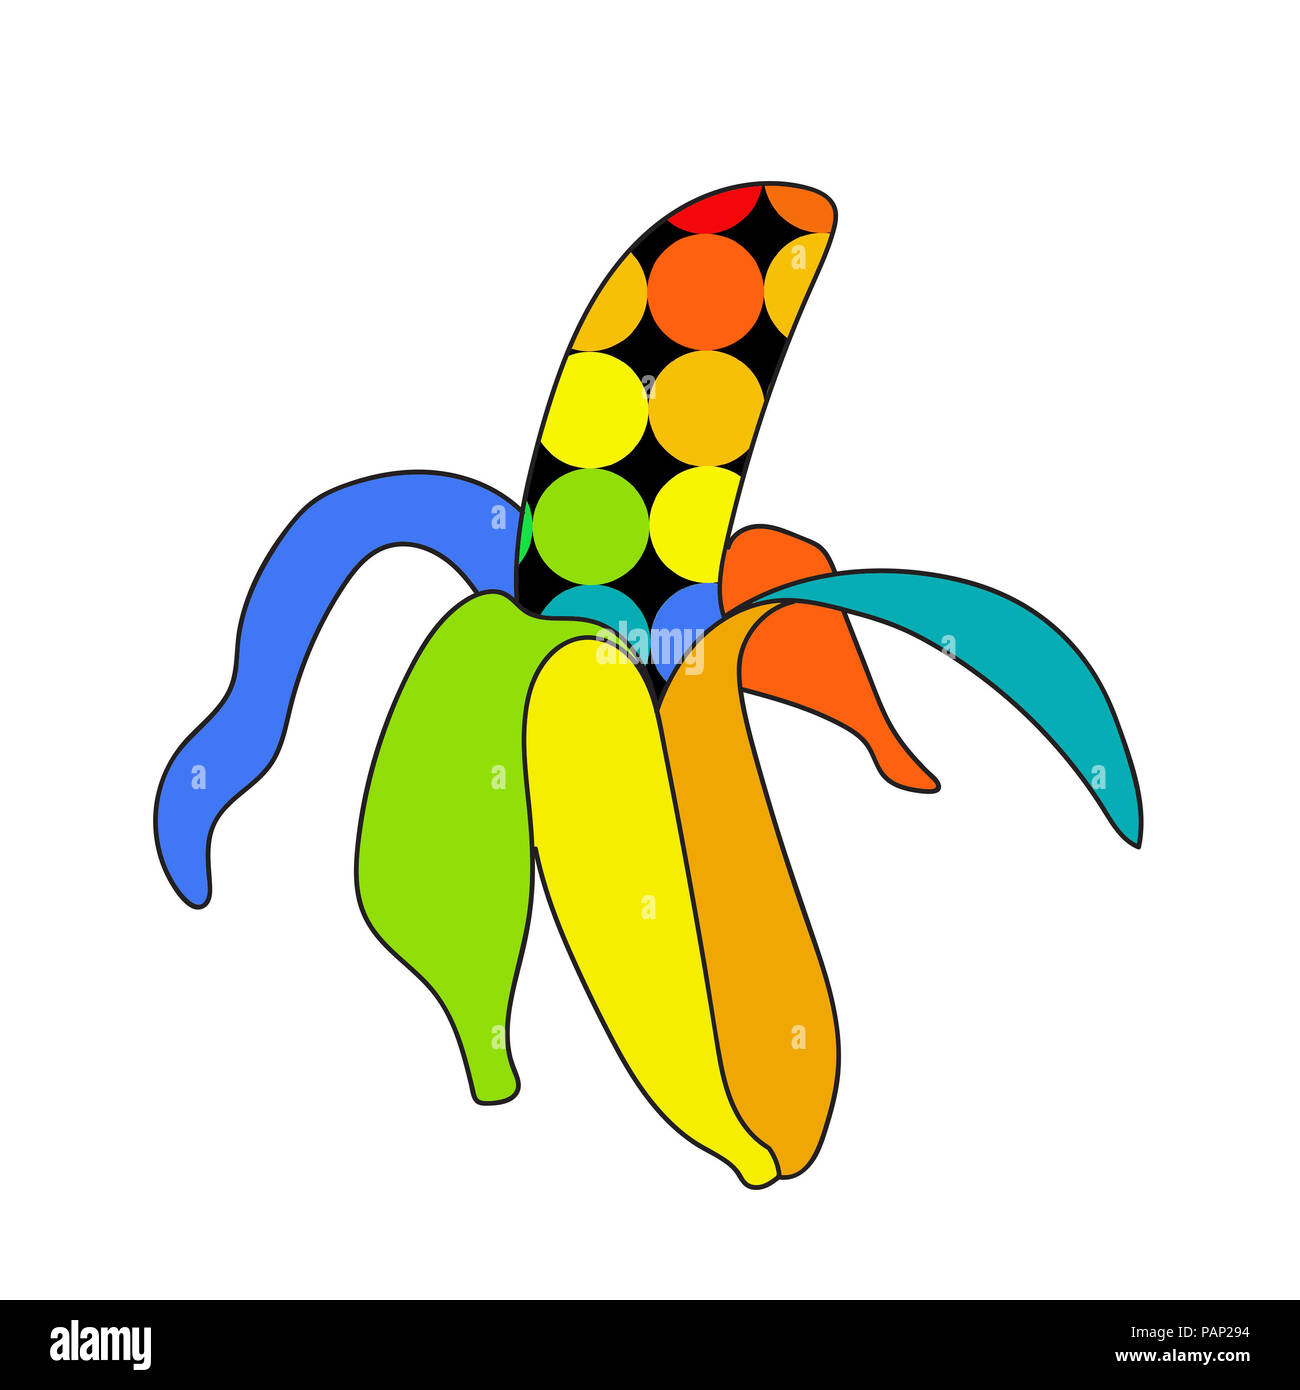 Stylized illustration of a peeled banana is rainbow colors against a white background. Stock Photo